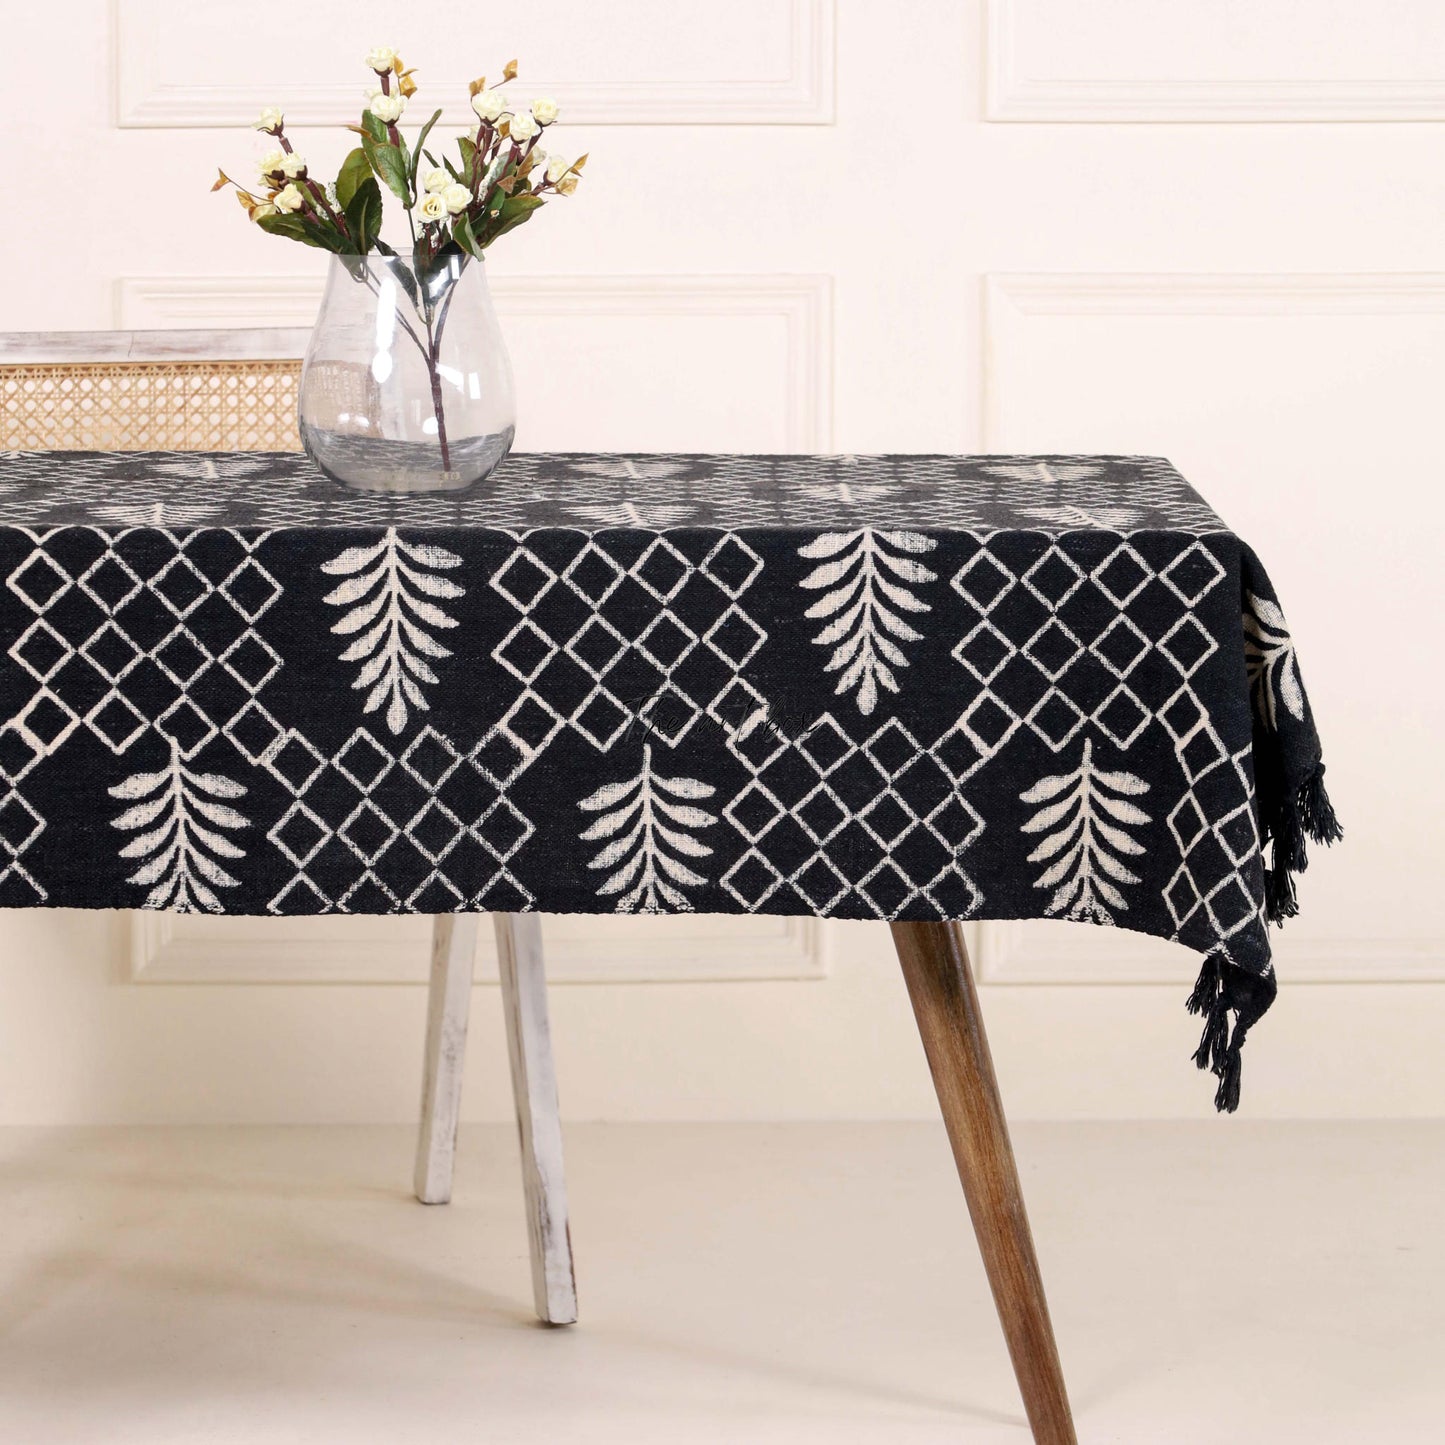 Black Table Covers with White Floral